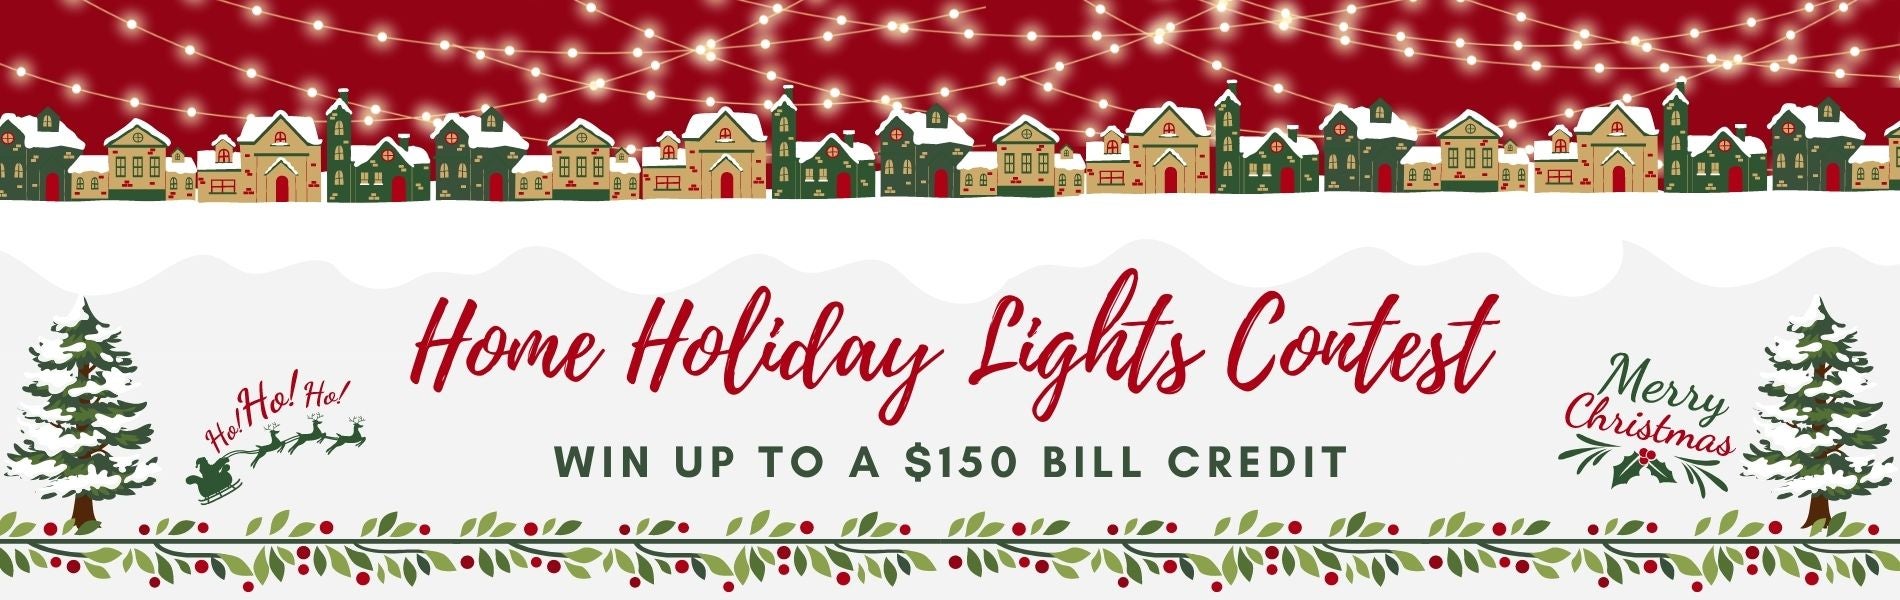 Home Holiday Lights Contest! Win up to a $150 Bill Credit! Merry Christmas! 